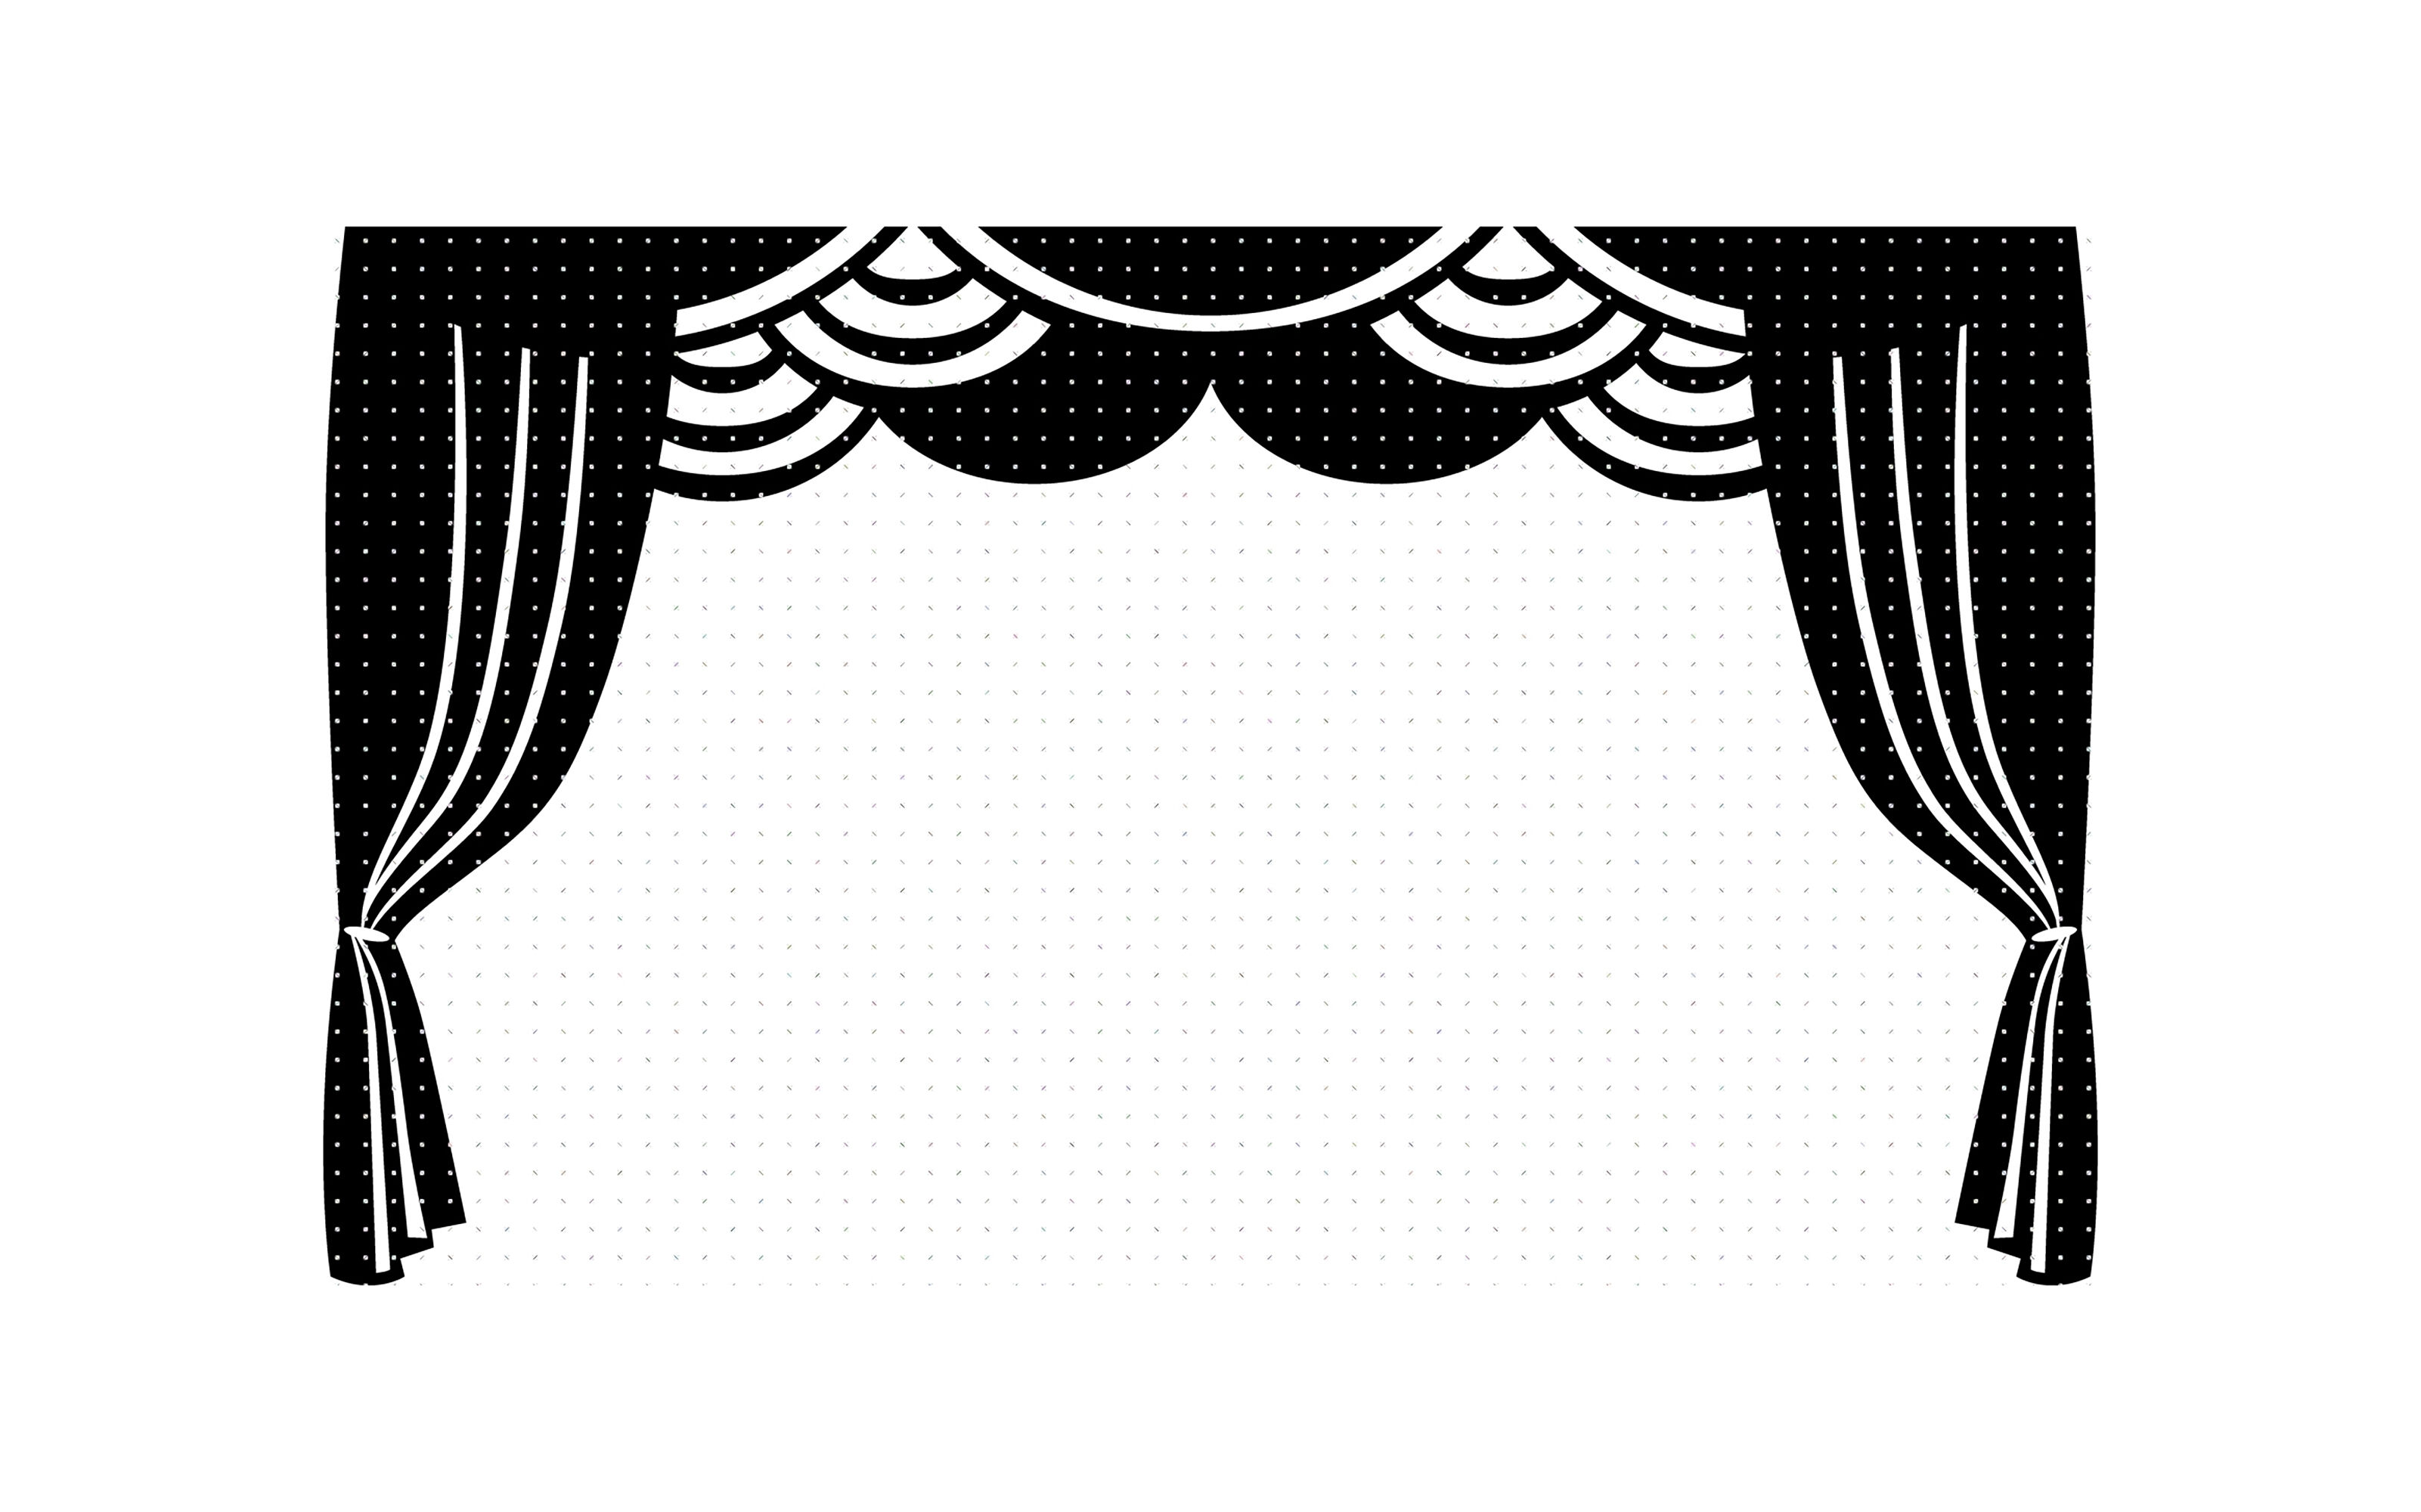 Stage Curtain Svg Dxf Vector Eps Clipart Cricut Download By Crafteroks Thehungryjpeg Com